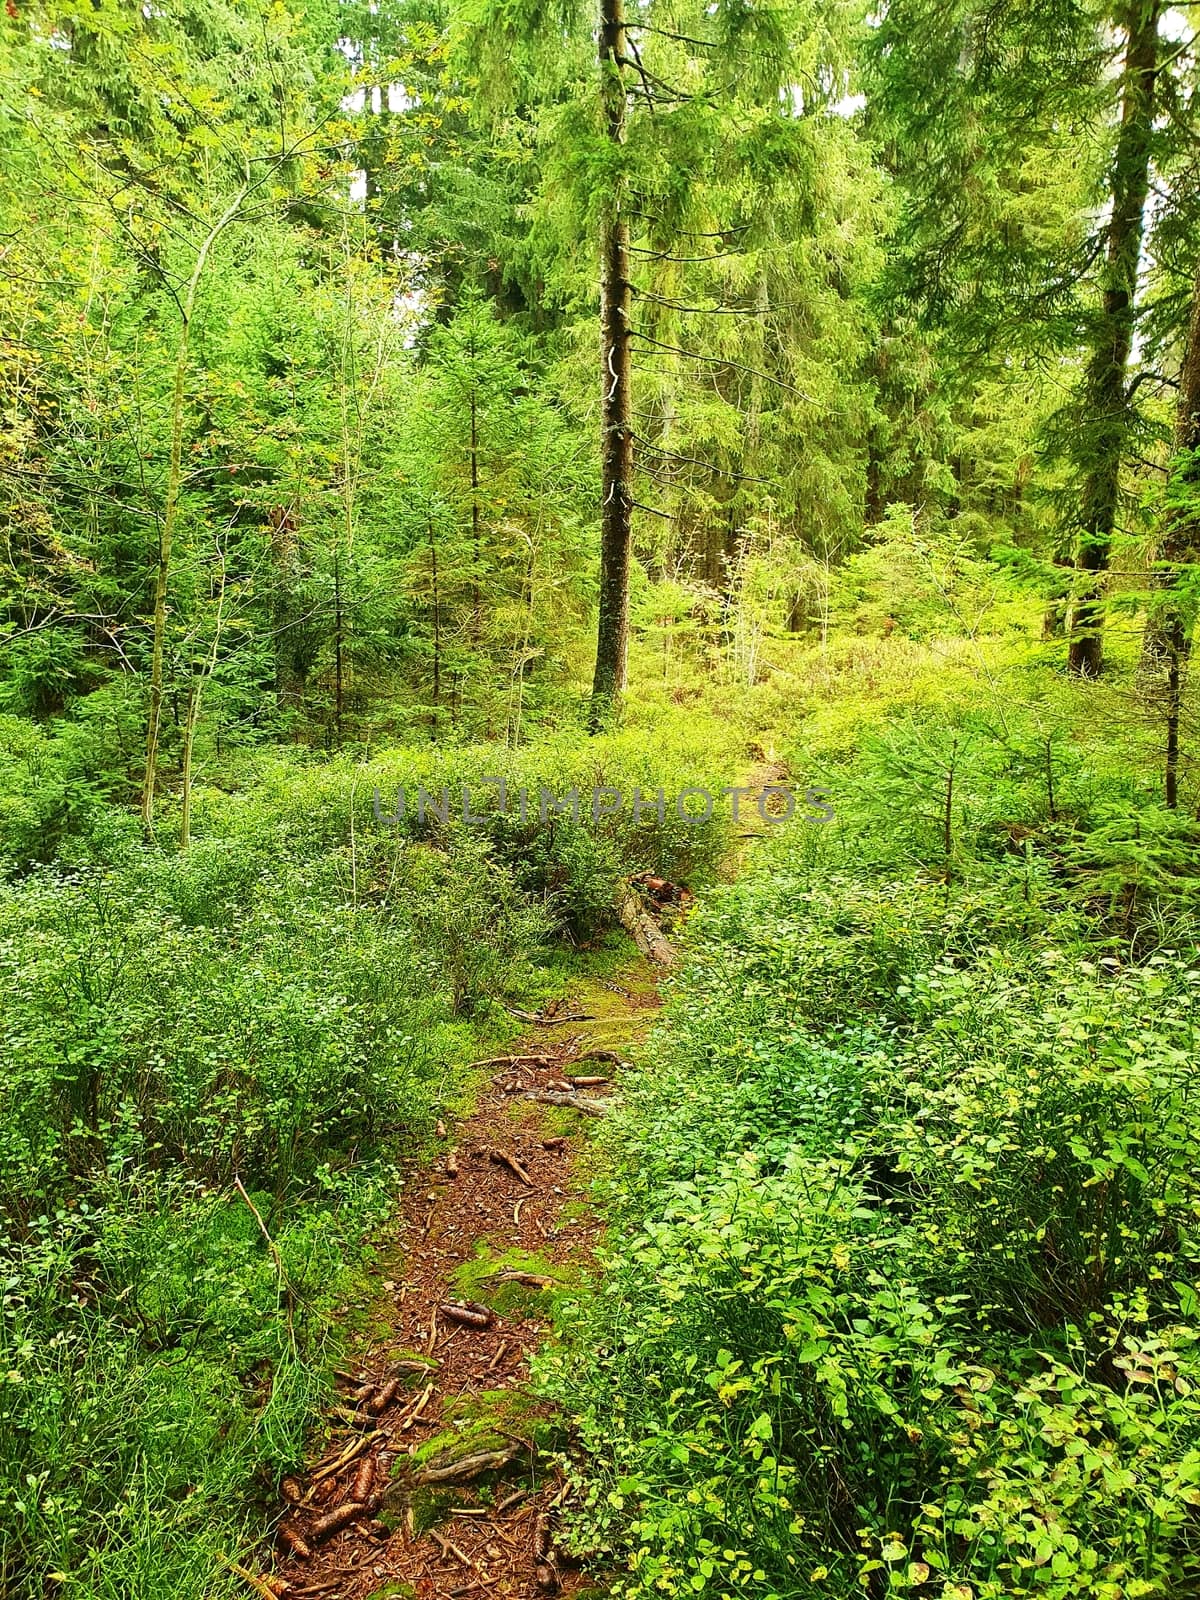 Forest walking path through green coniferous trees.